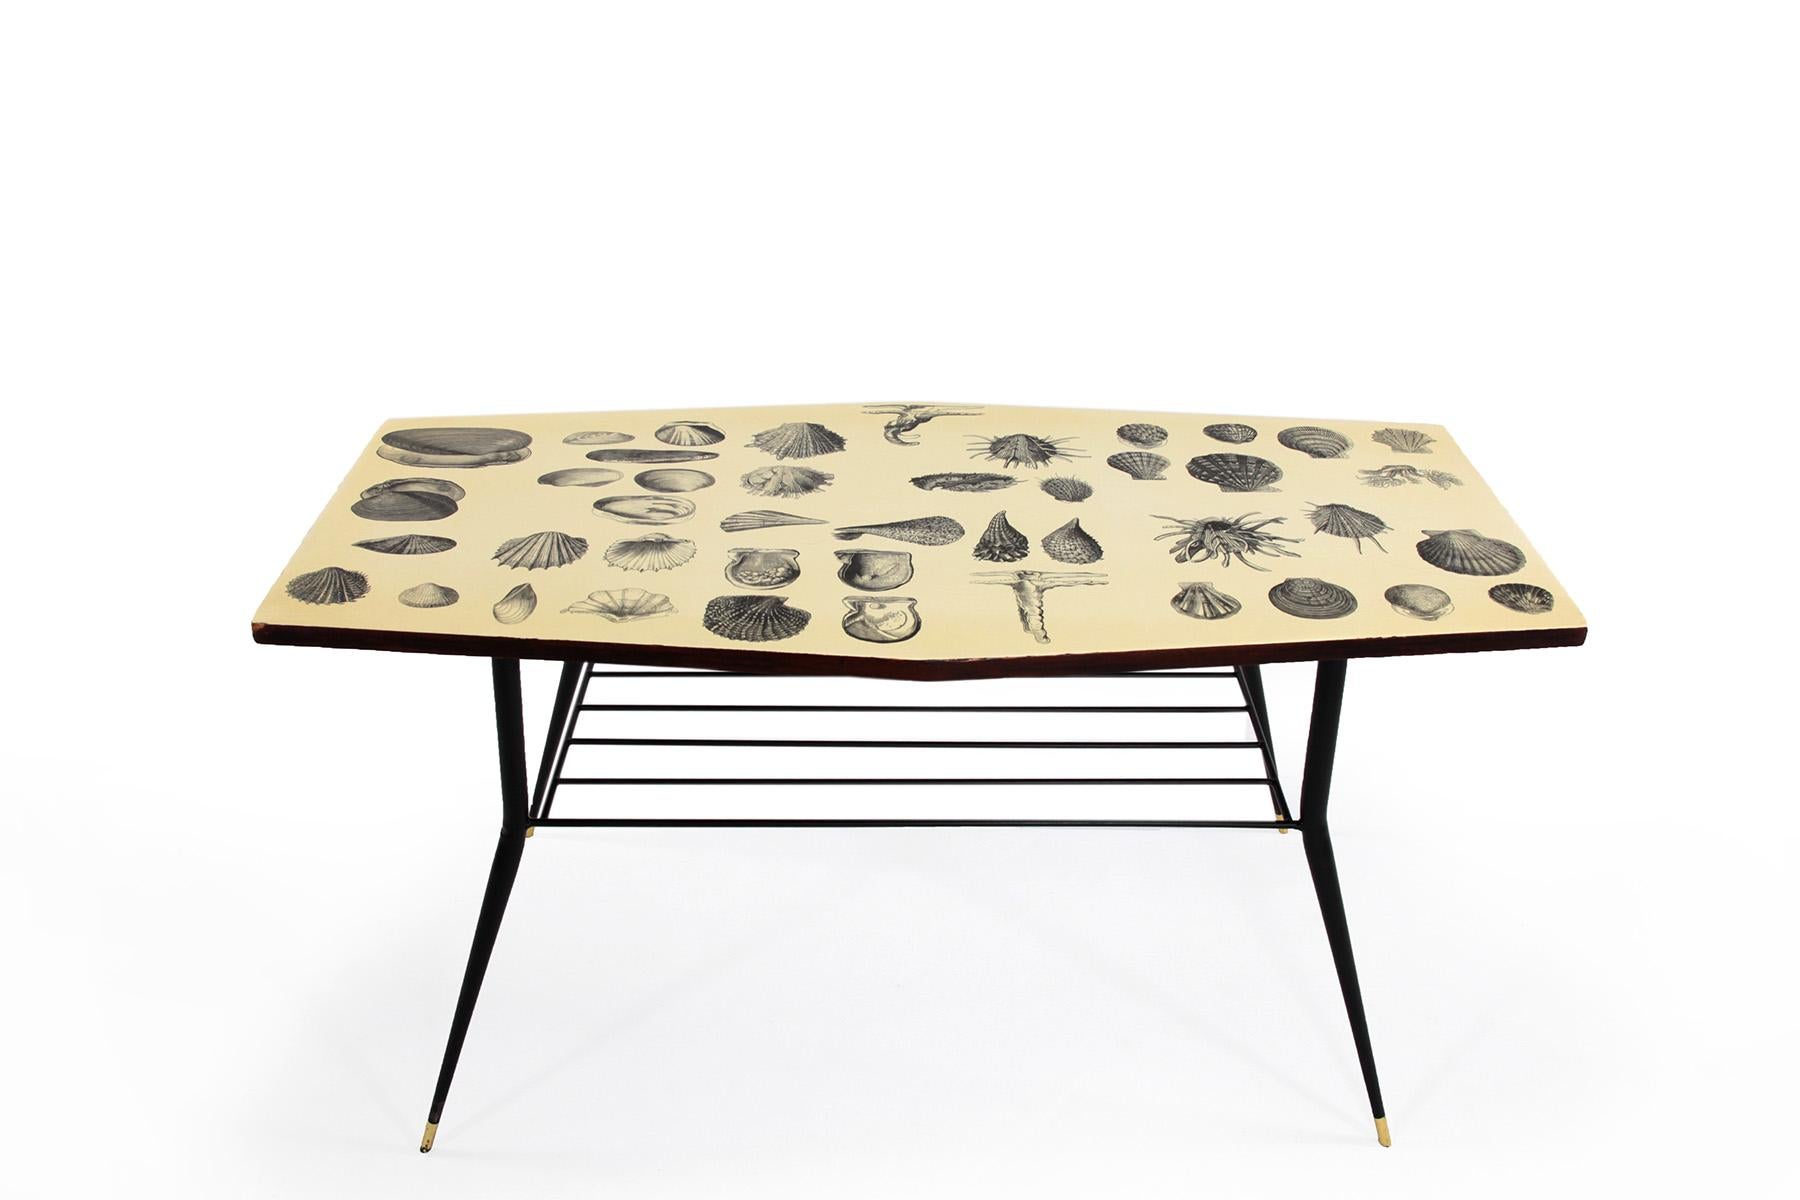 This side table was designed in Italy in the 1950s. The table frame is made of black lacquered iron with brass ends and has a small shelf under the table top. The table top is decorated with a shell motif reminiscent of designs by Piero Fornasetti